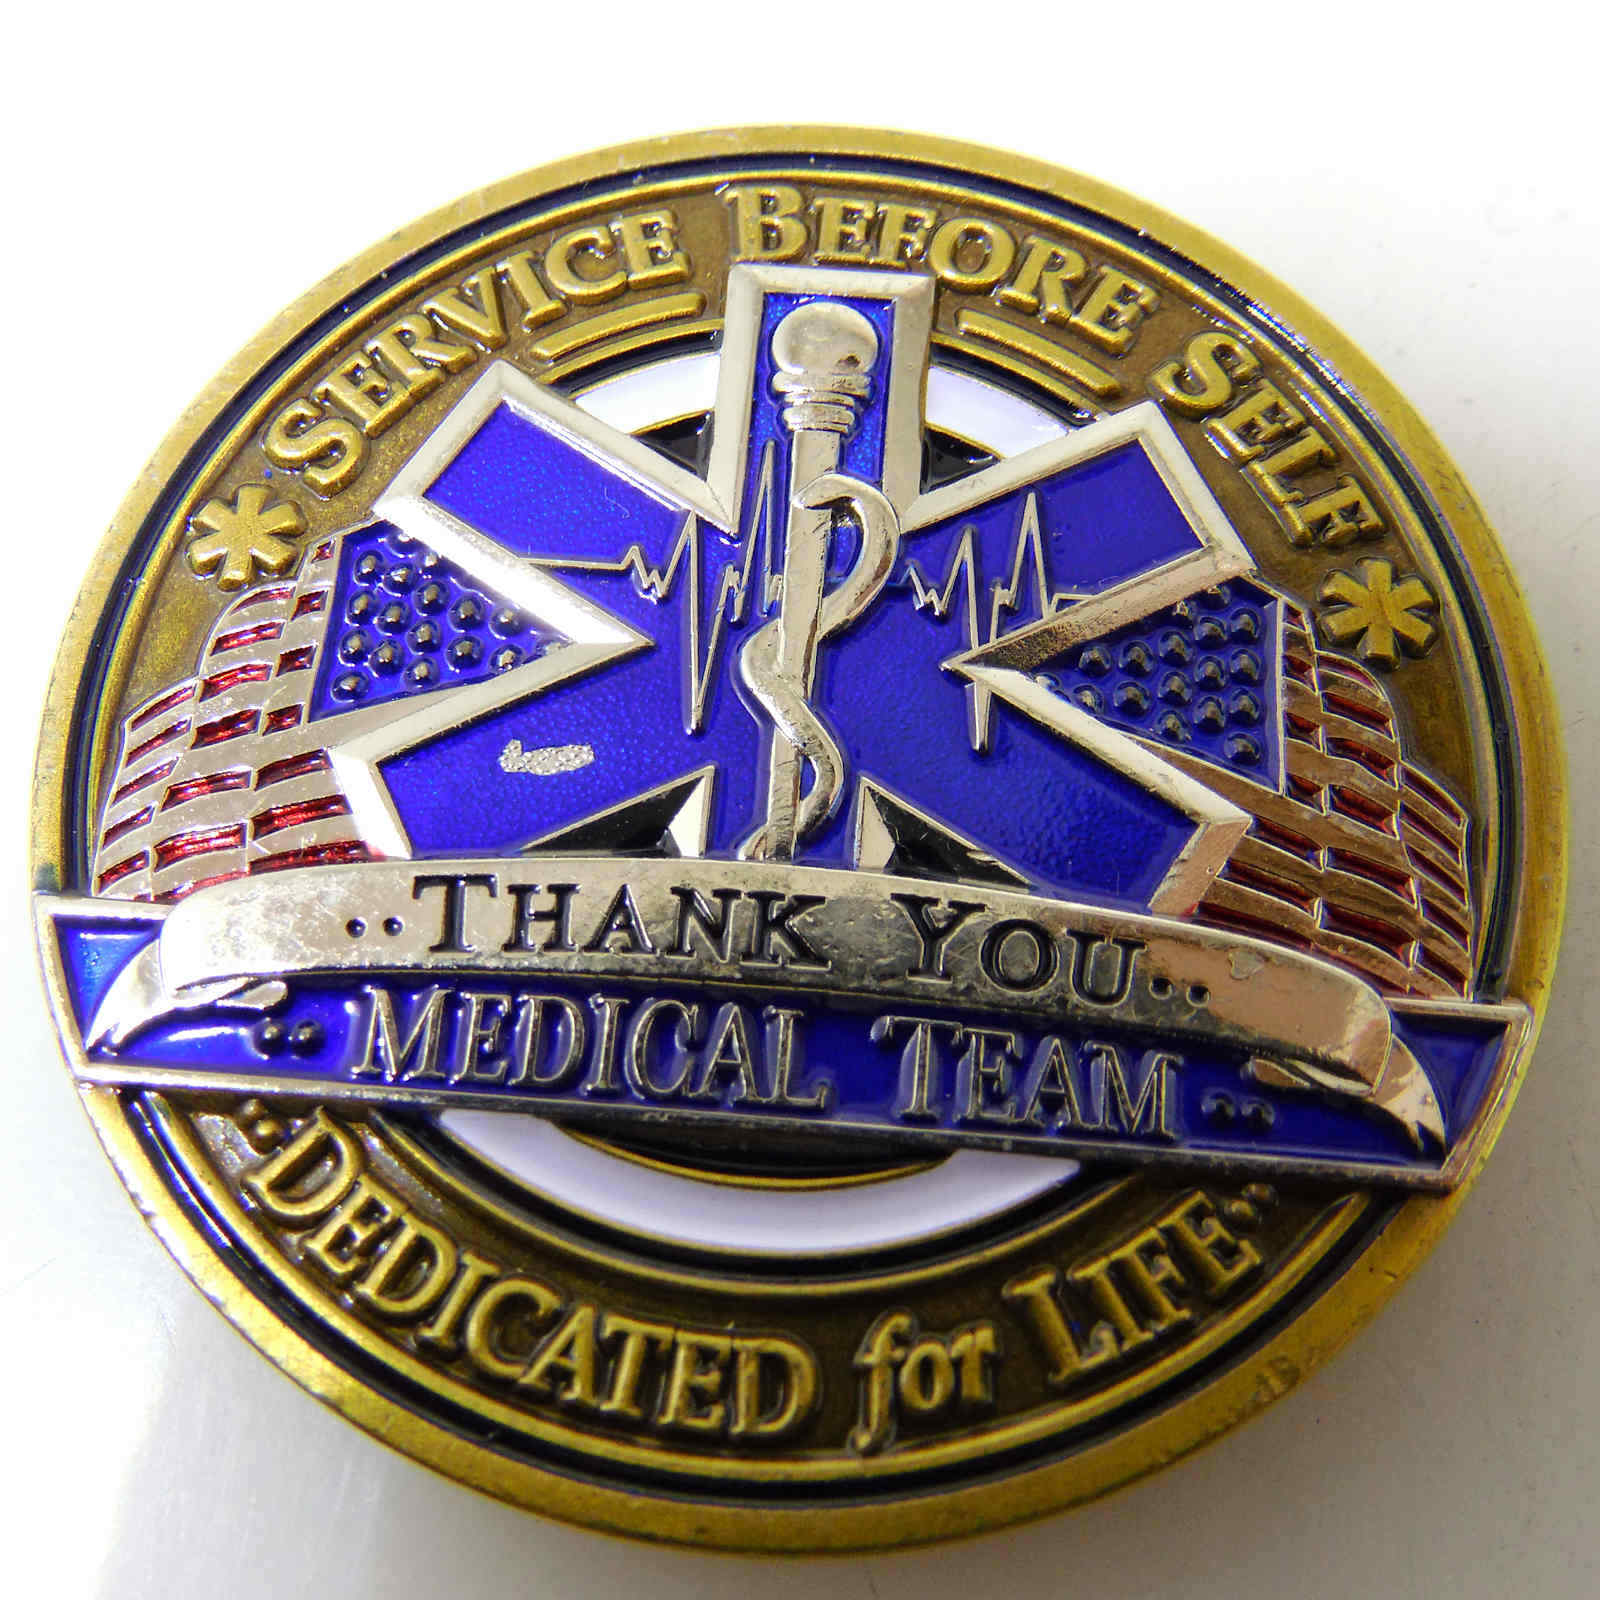 SERVICE BEFORE SELF DEDICATED FOR LIFE CHALLENGE COIN